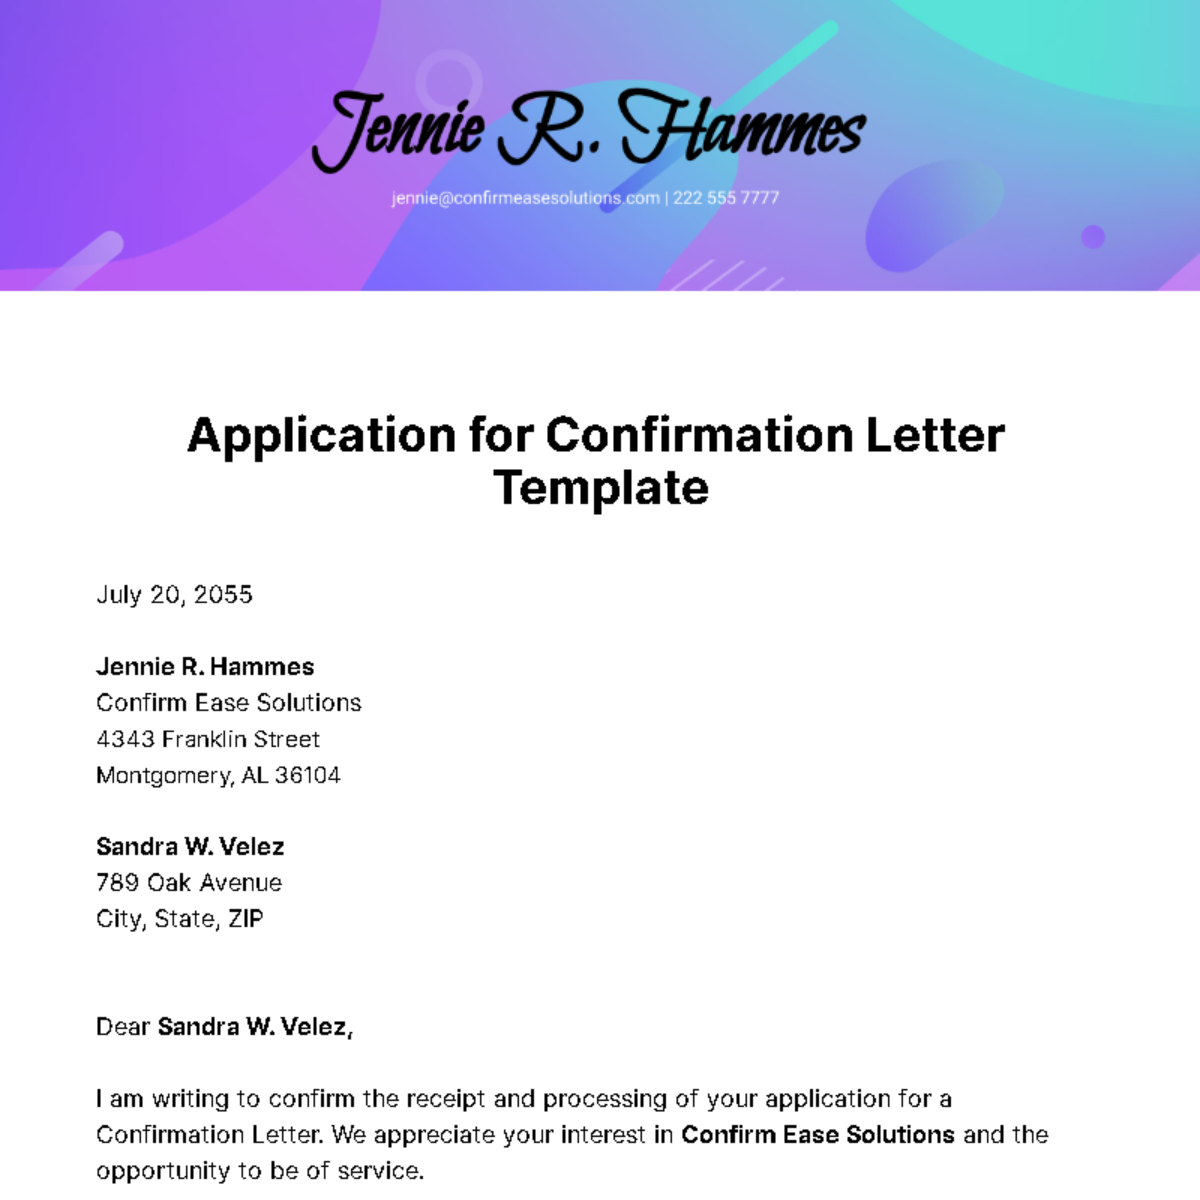 Free Application for Confirmation Letter Template